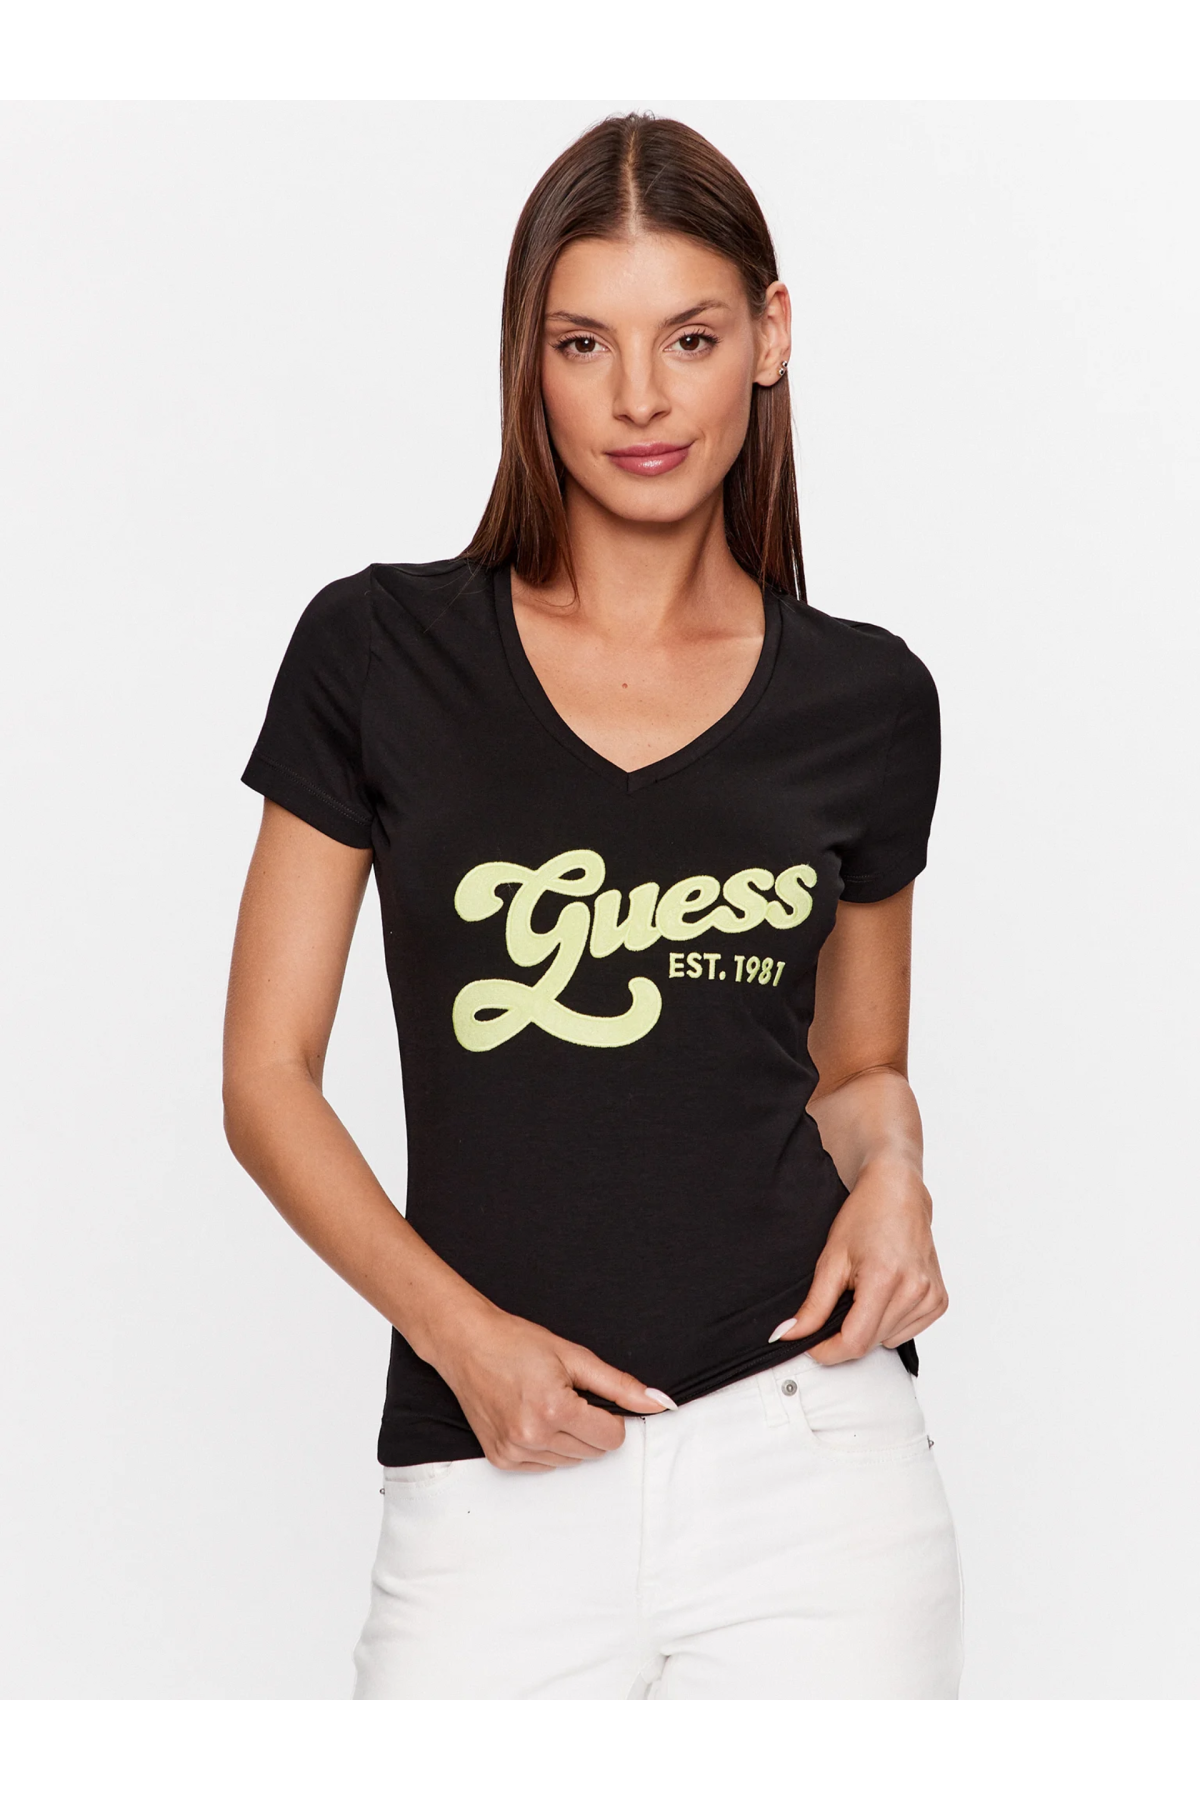 GUESS JEANS W3YI34 J1314 WOMAN Velikost: S